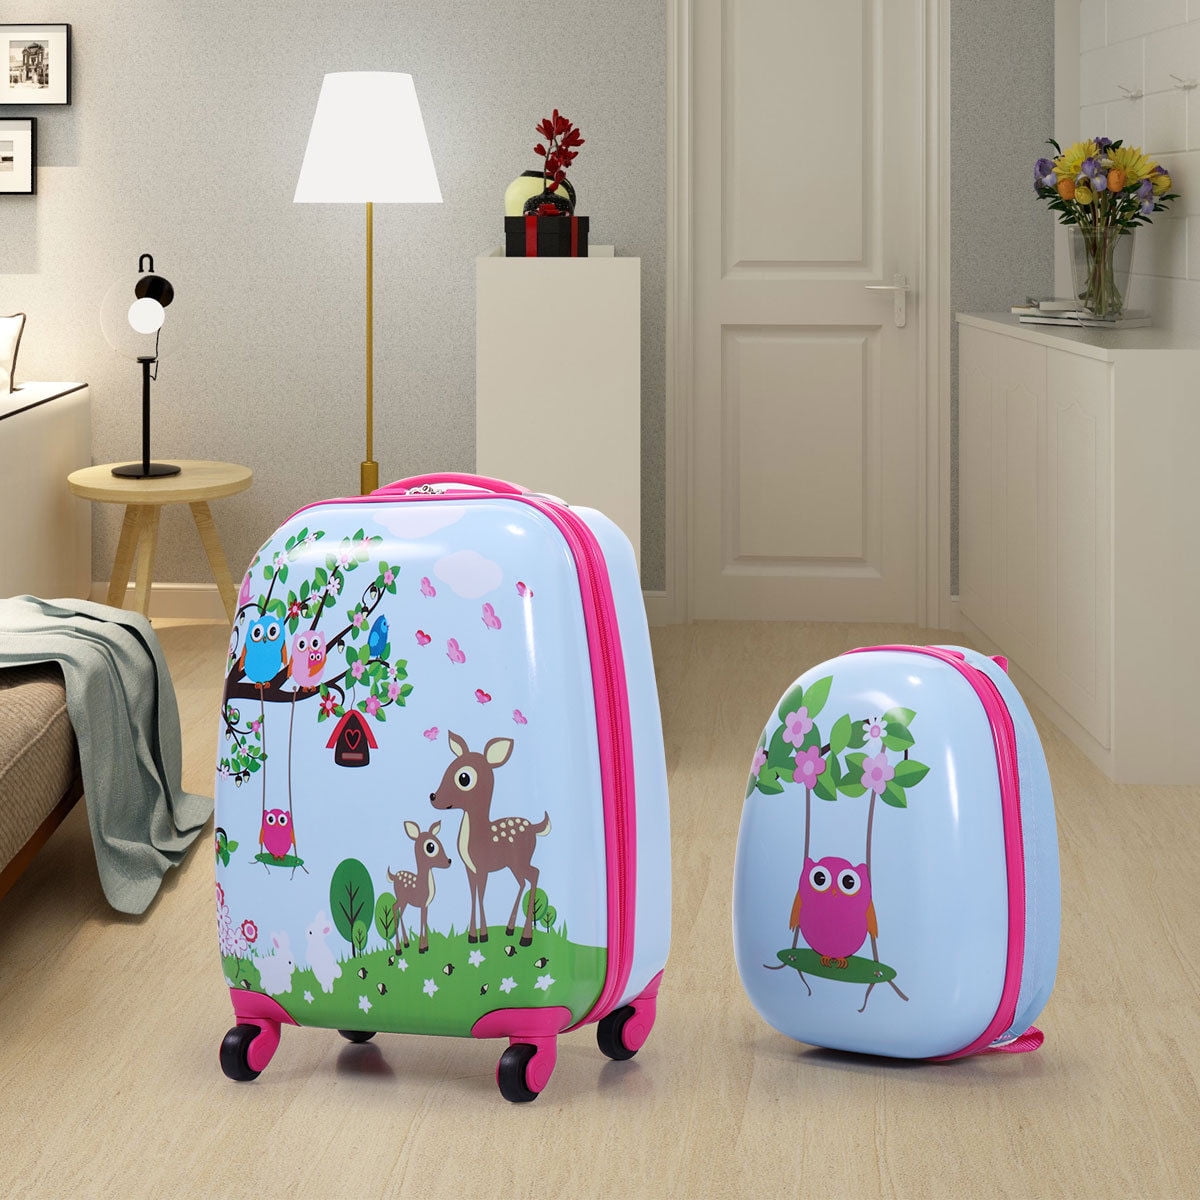 kid travel suitcase bed